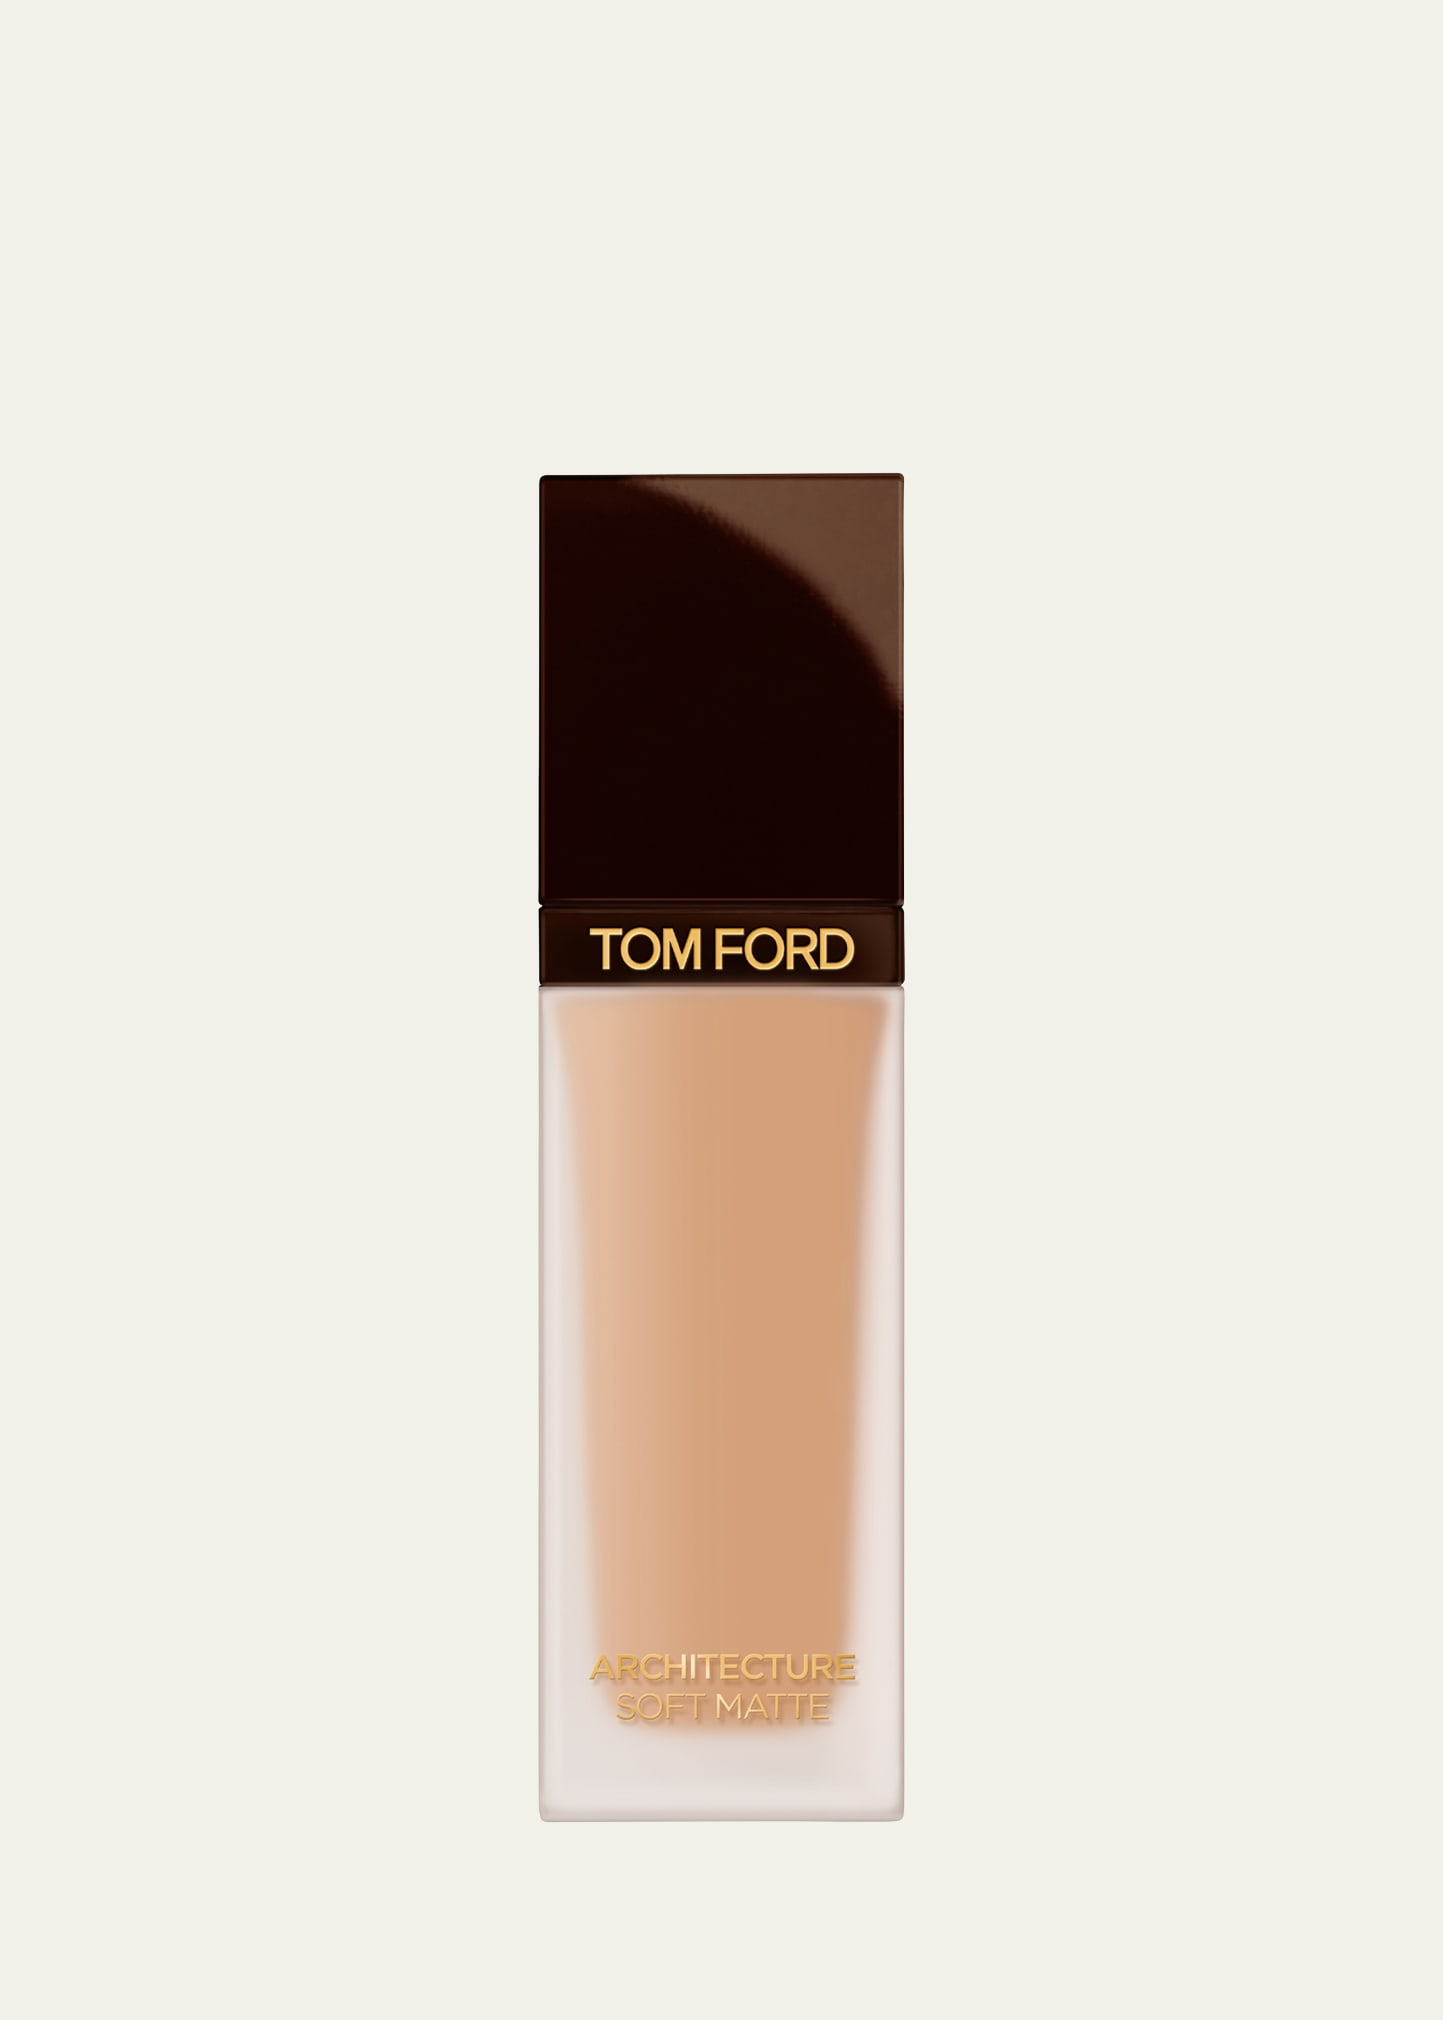 Tom Ford Architecture Soft Matte Foundation In Asm - 6 Natural